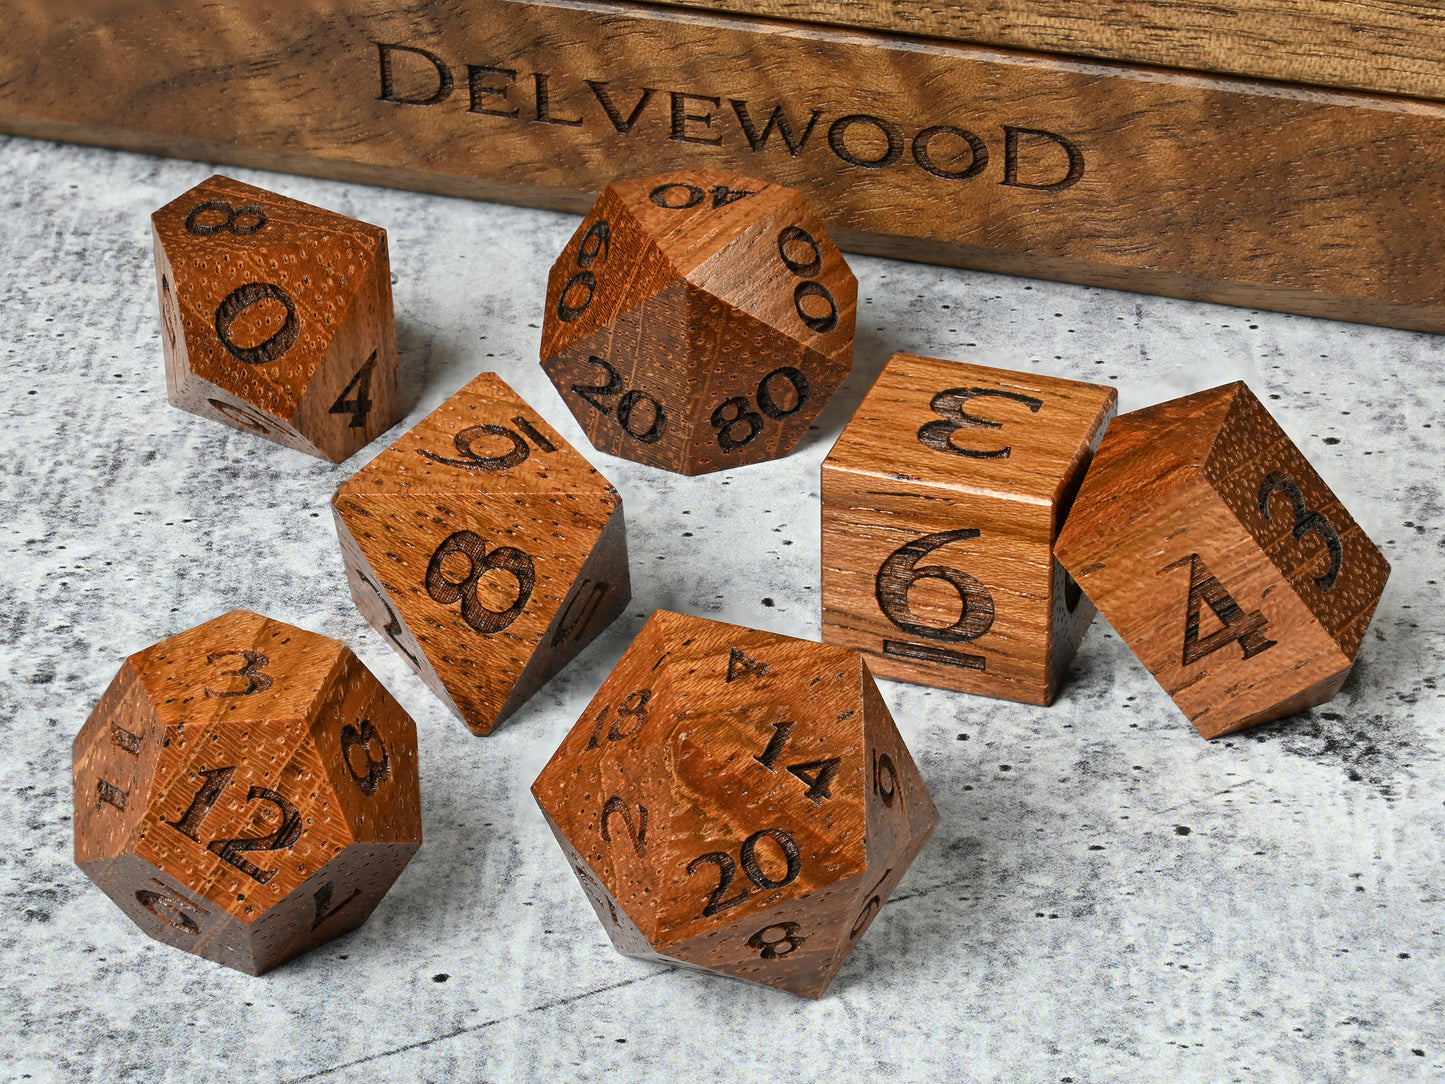 Jatoba wood dice set for dnd rpg tabletop gaming in front of Delvewood delver's kit dice box.